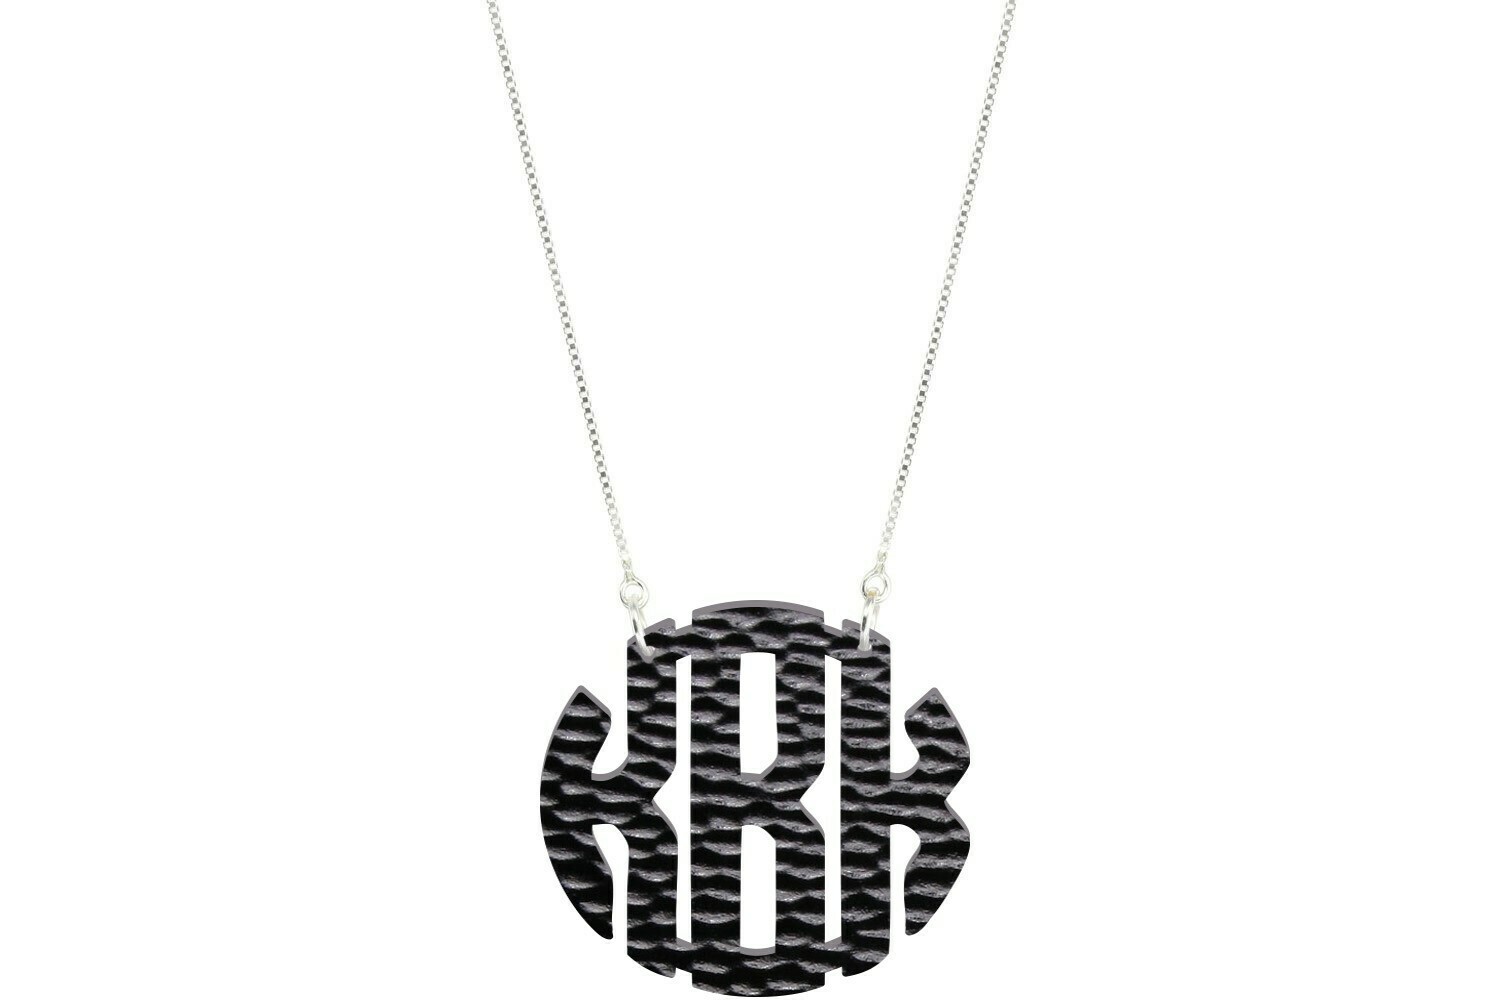 Clean Block Monogram with Duo Necklace